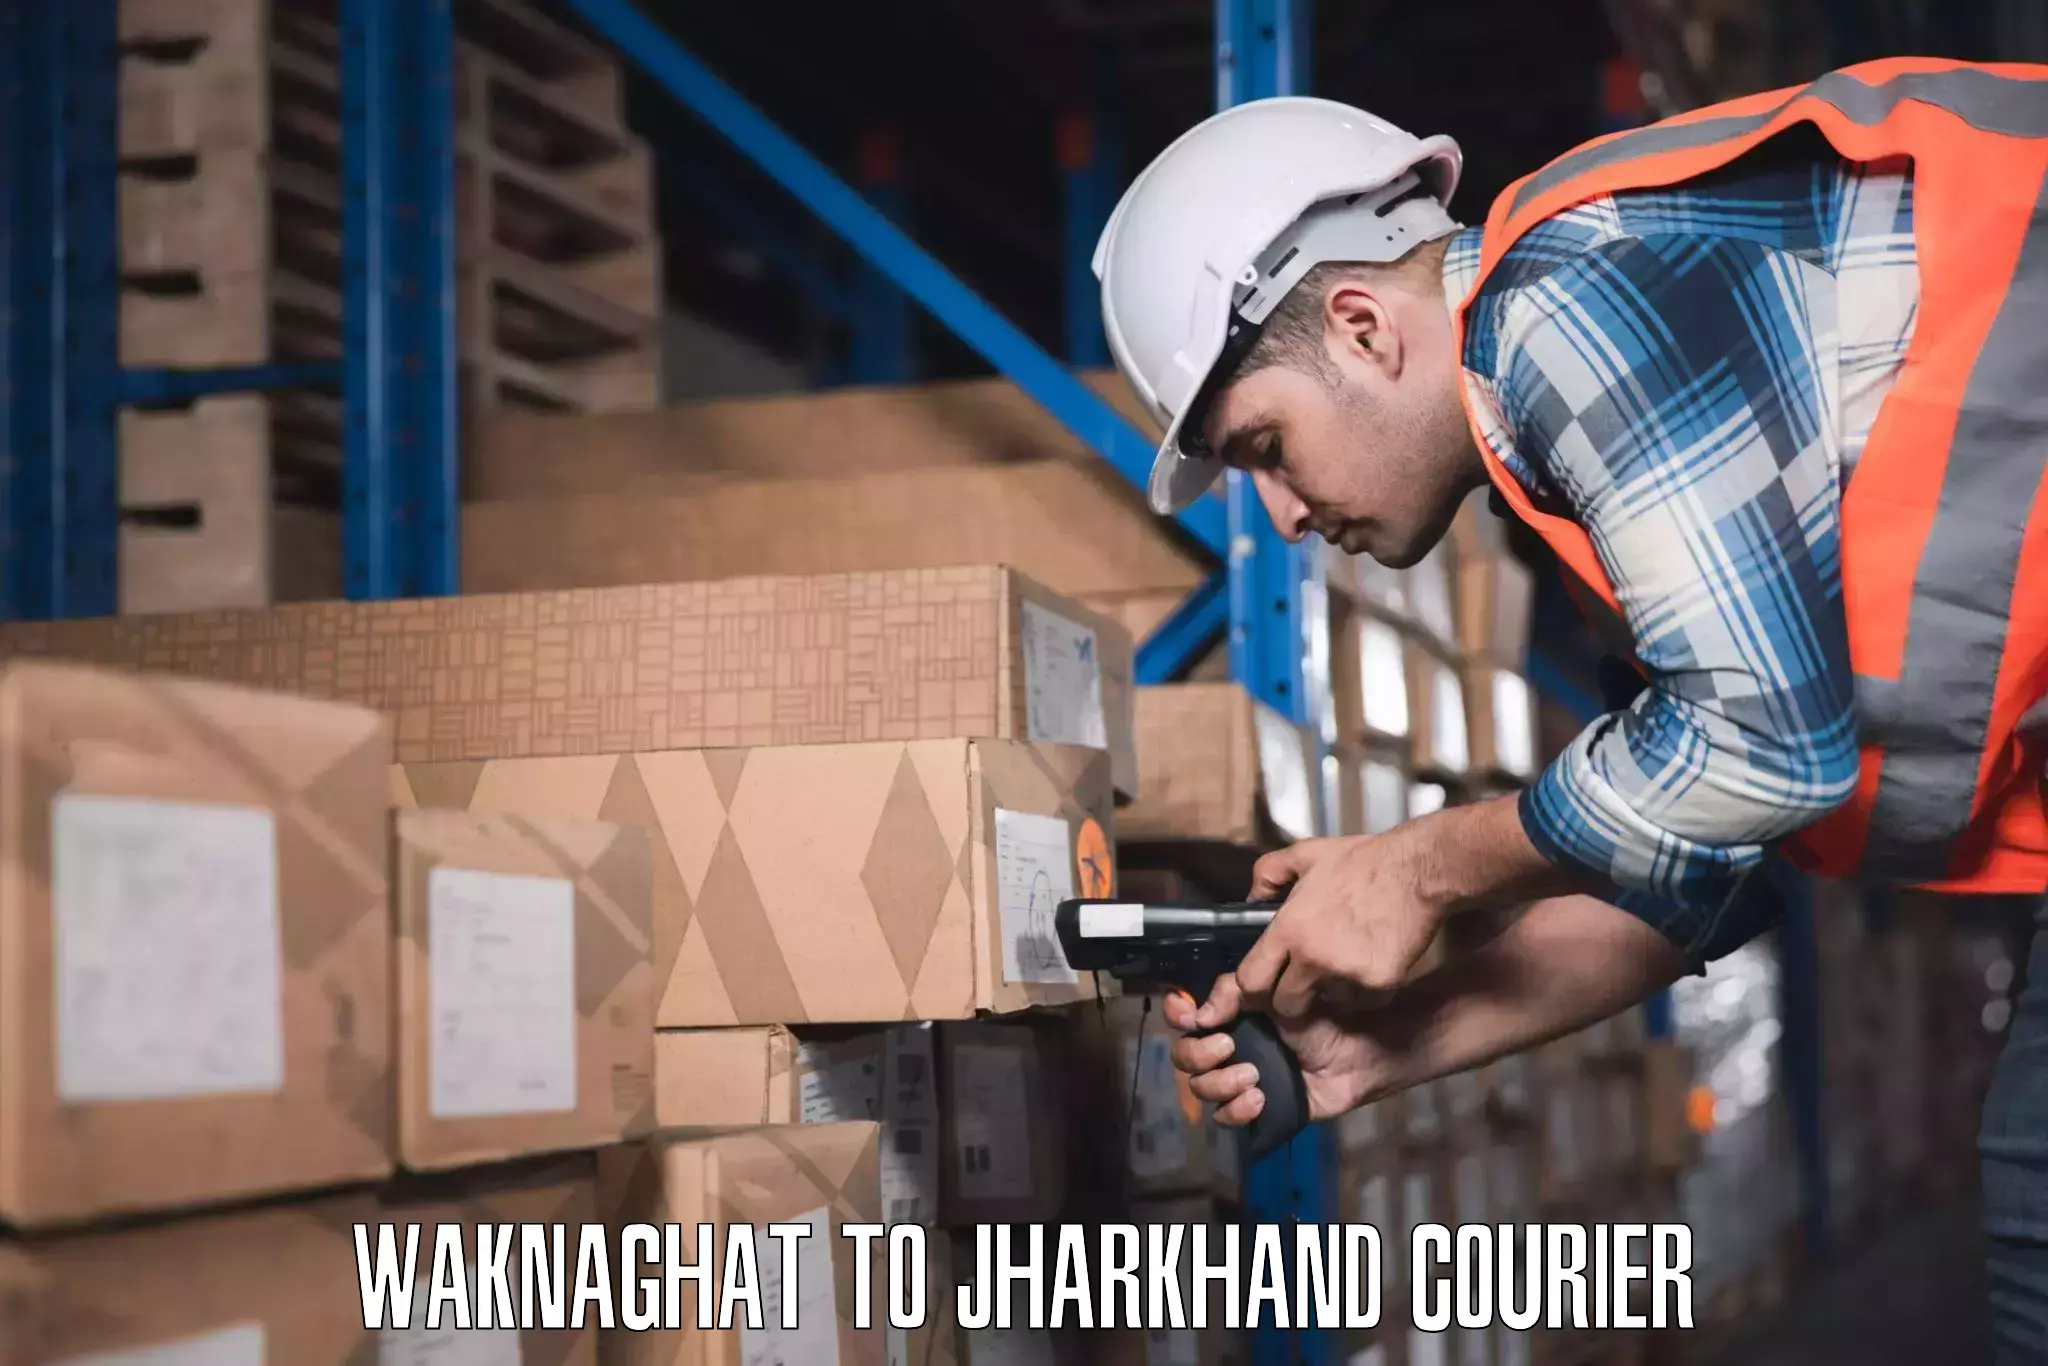 Luggage shipping planner Waknaghat to Jamshedpur